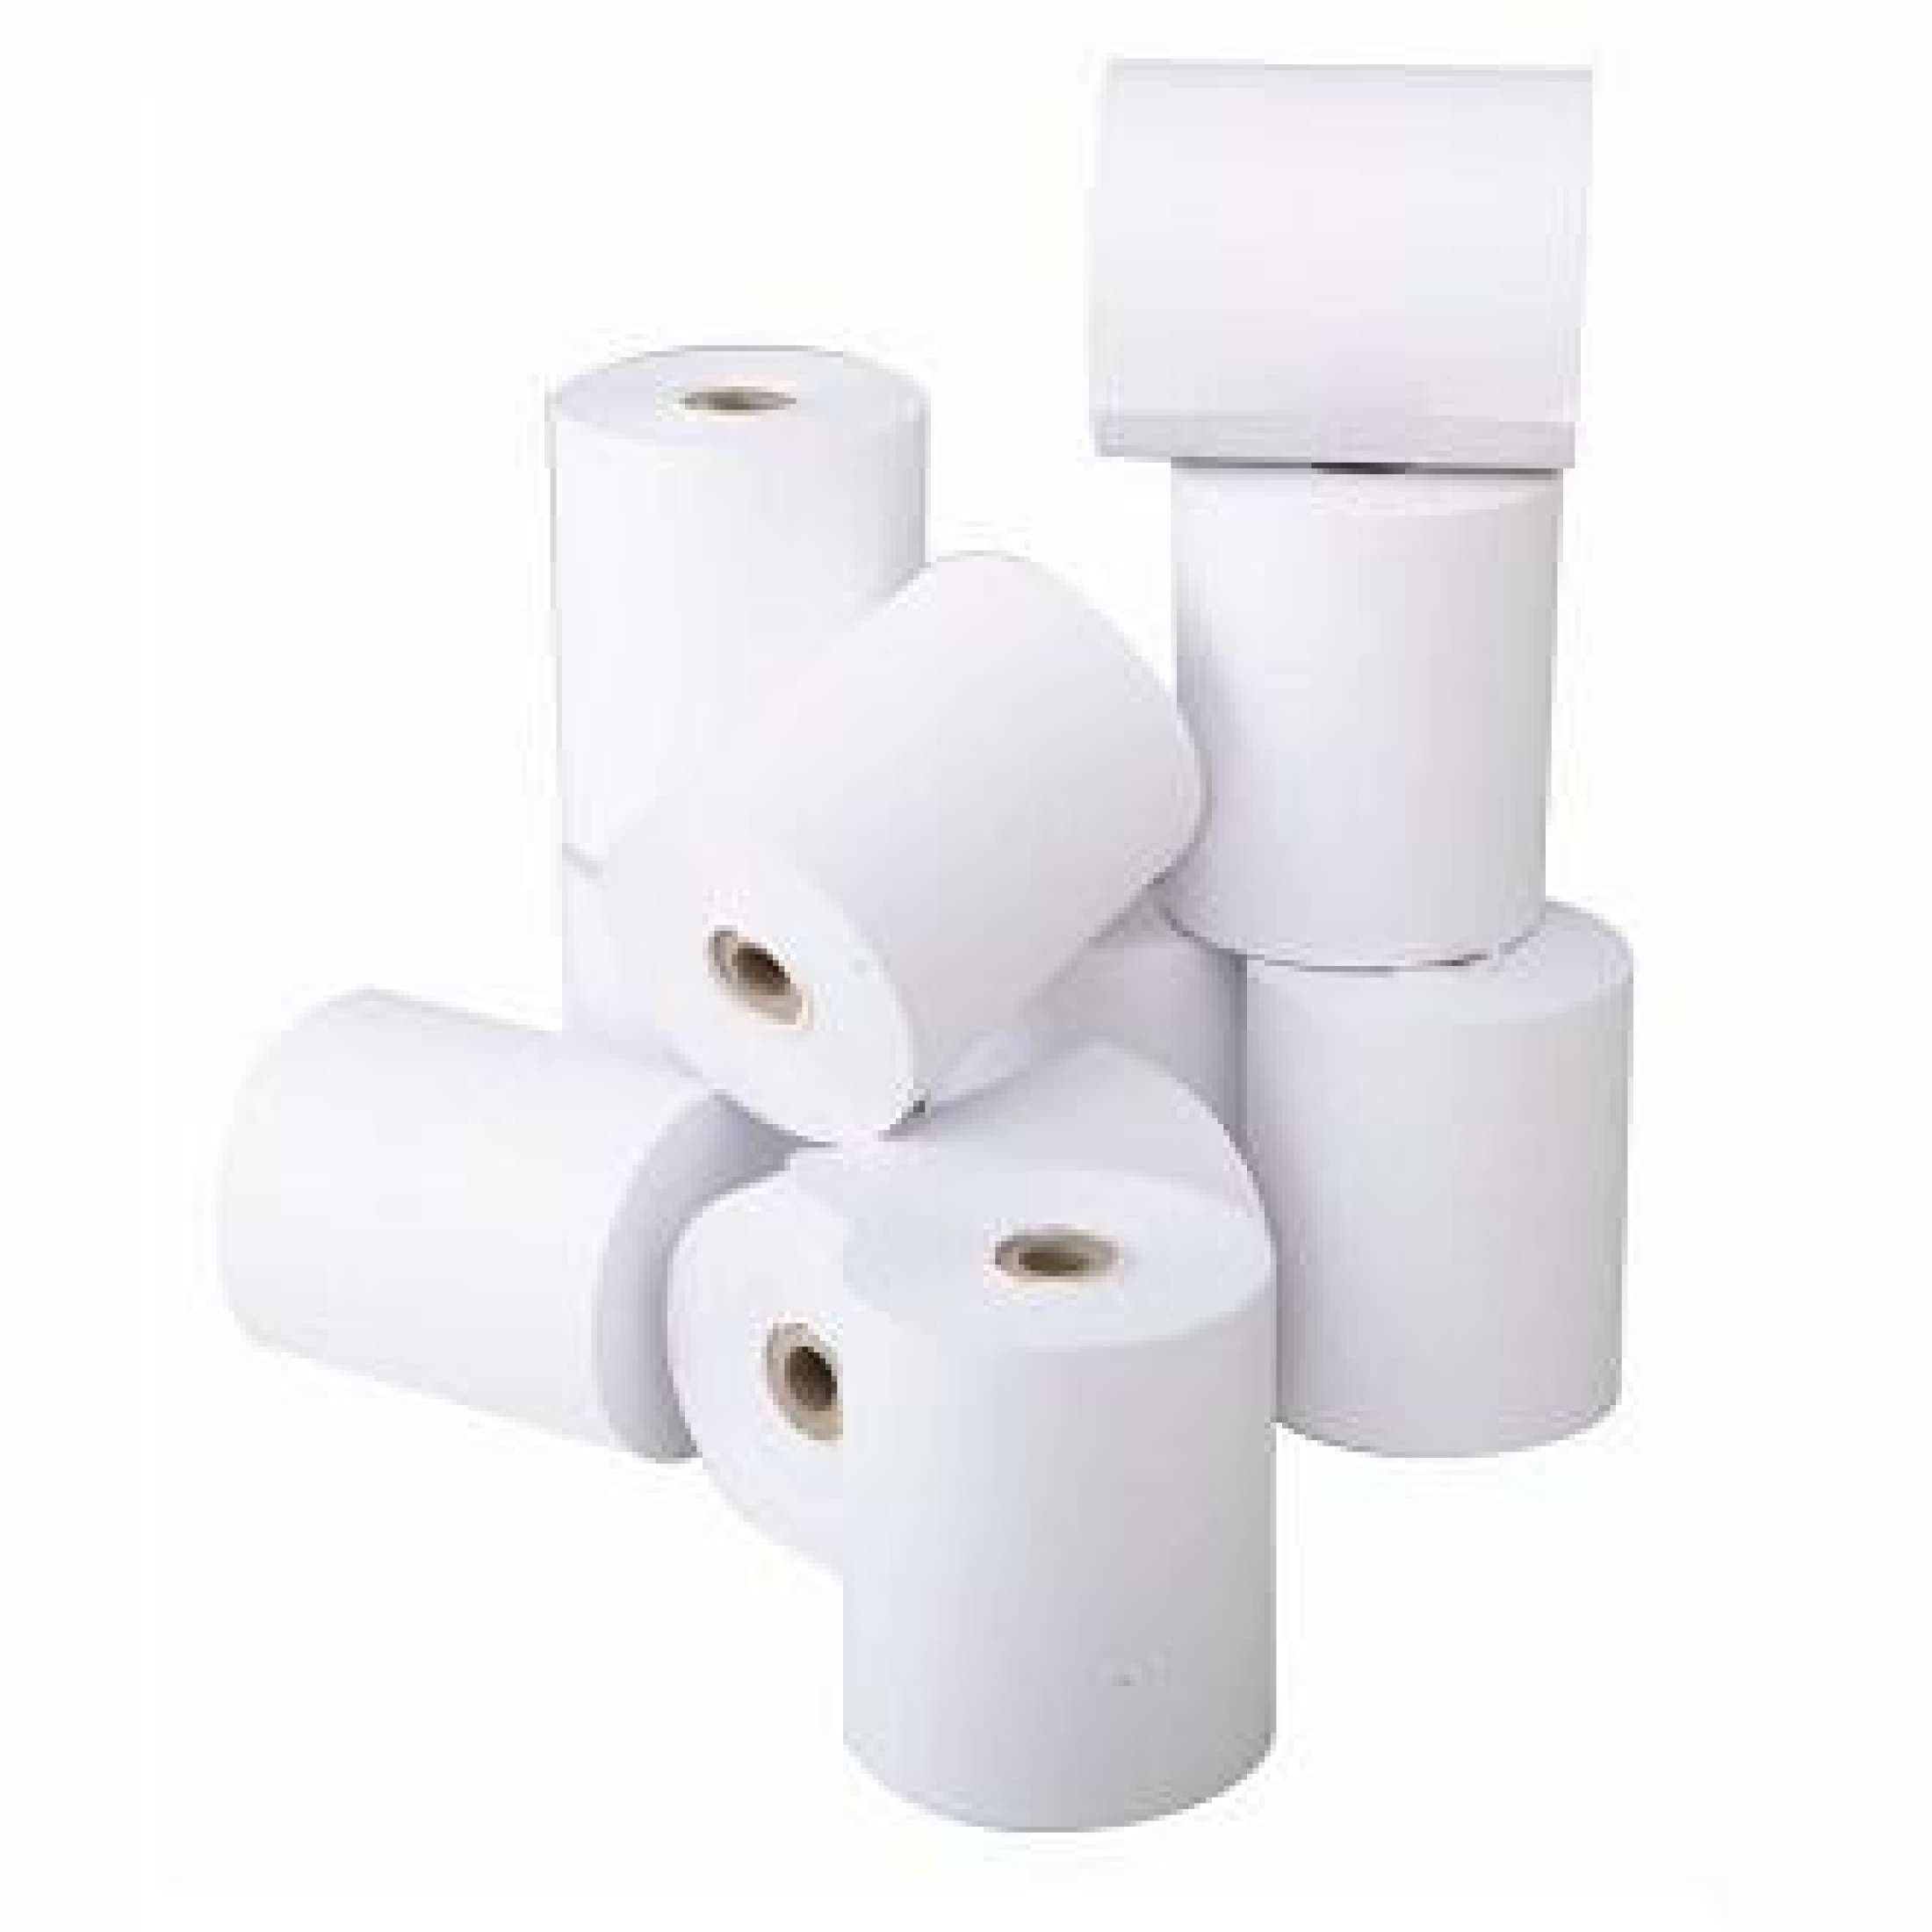 Thermal Roll 3X3 (45M) - White Single Piece